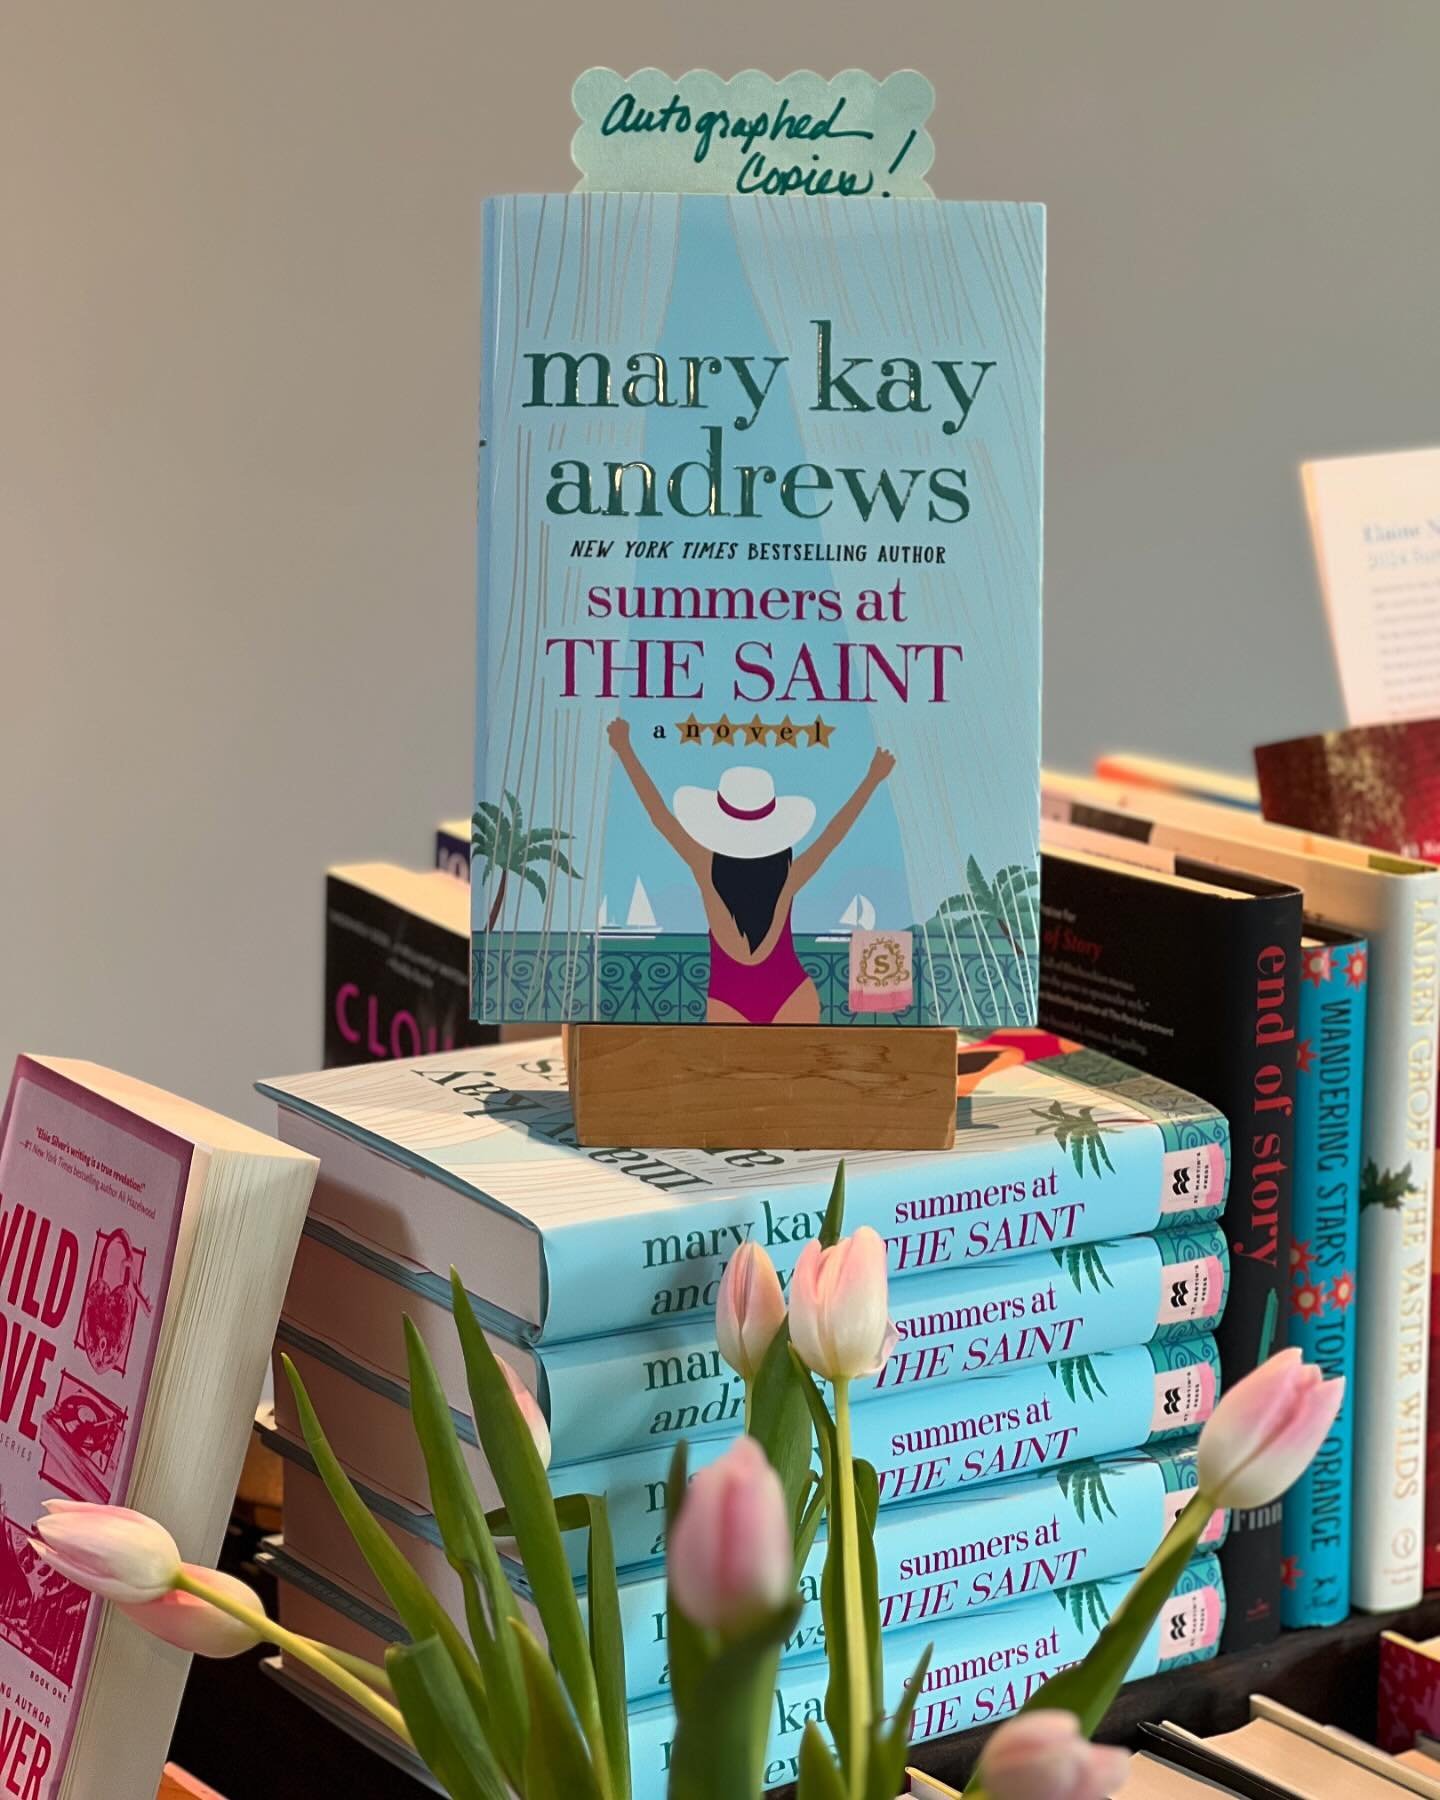 We have some great last minute gifts for MOM!

☀️Signed copies of the NEW @marykayandrews novel are perfect for a weekend #beachread
 🐚 550 piece Sanibel Shell #jigsawpuzzles puzzles are perfect for a relaxing afternoon.
 🎁 Comfy cotton jammies for